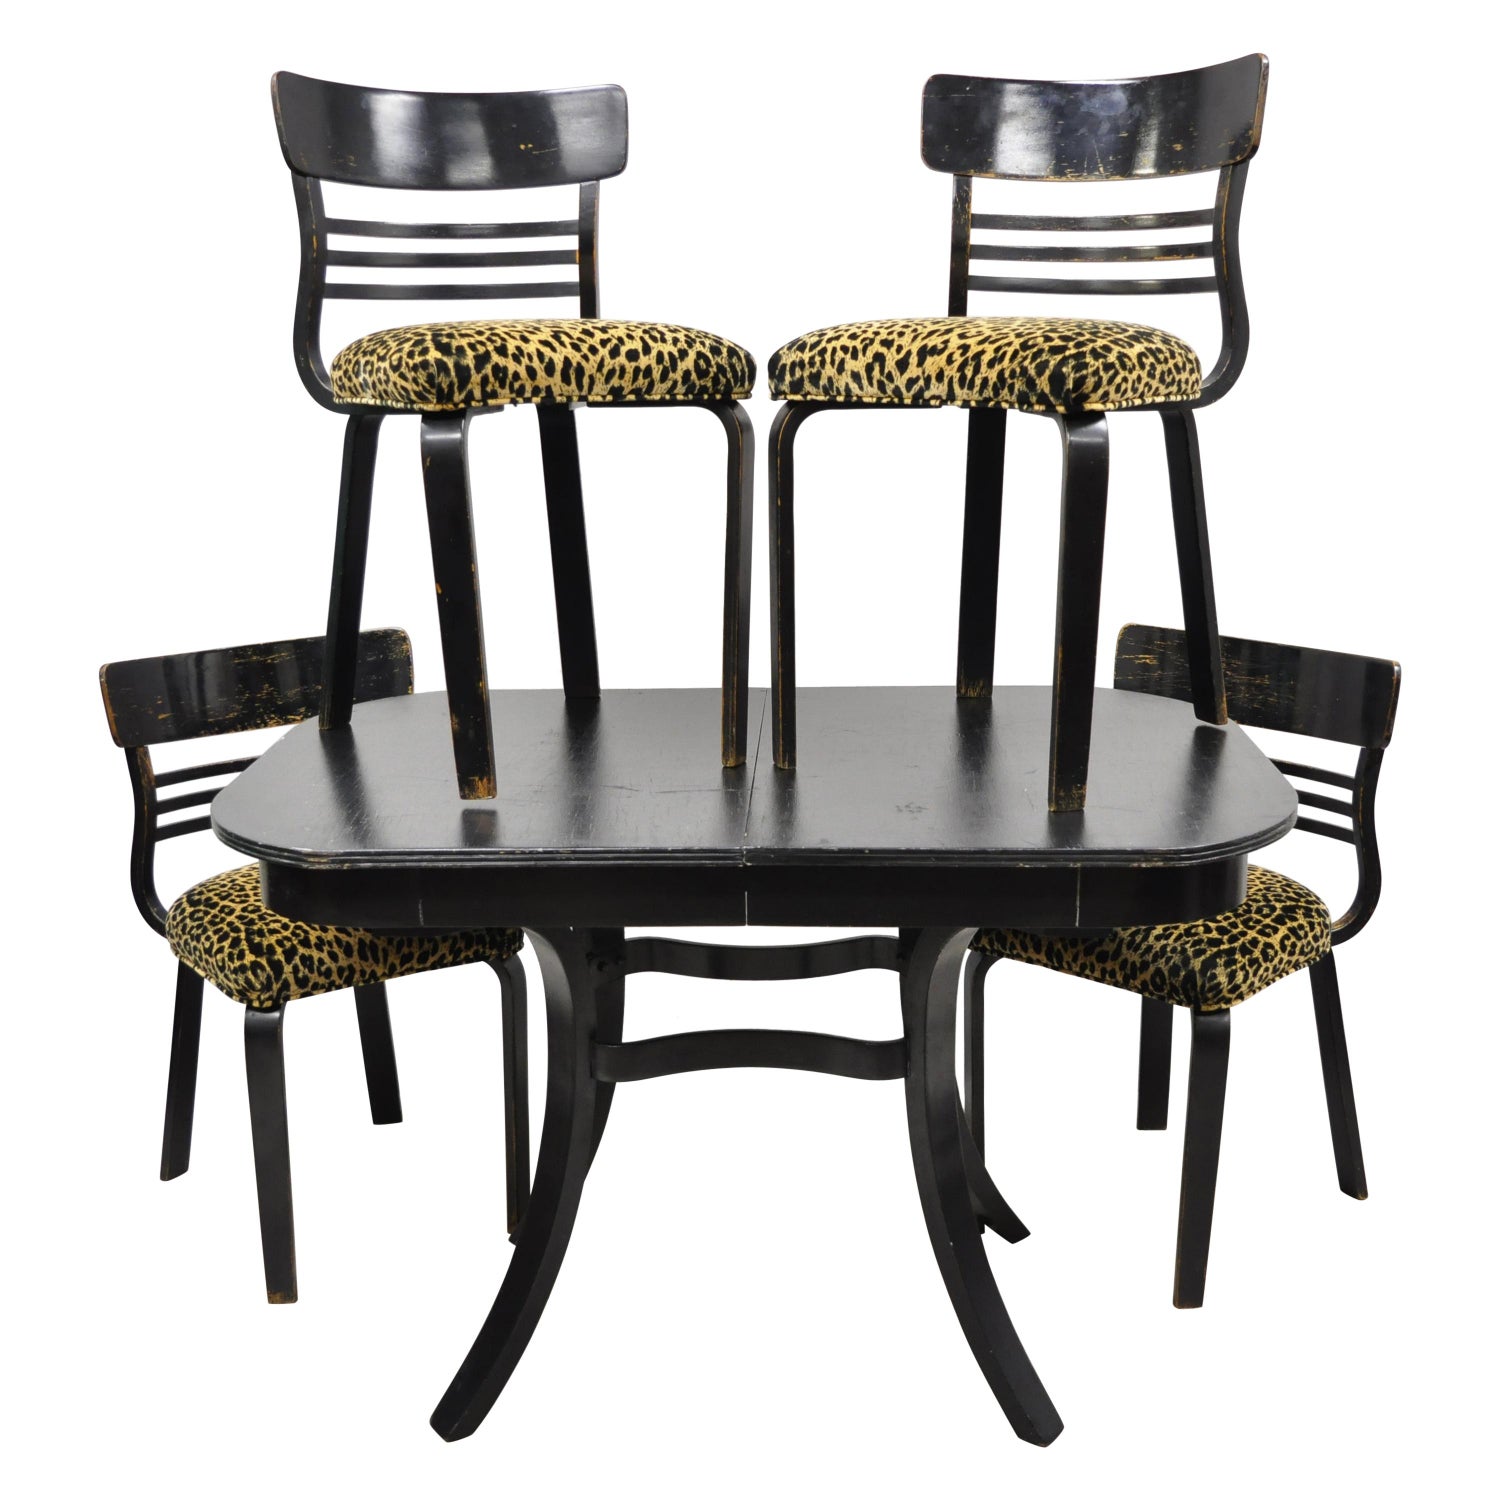 Black Distressed Dining Table / Facebook : For persistent spots, gently